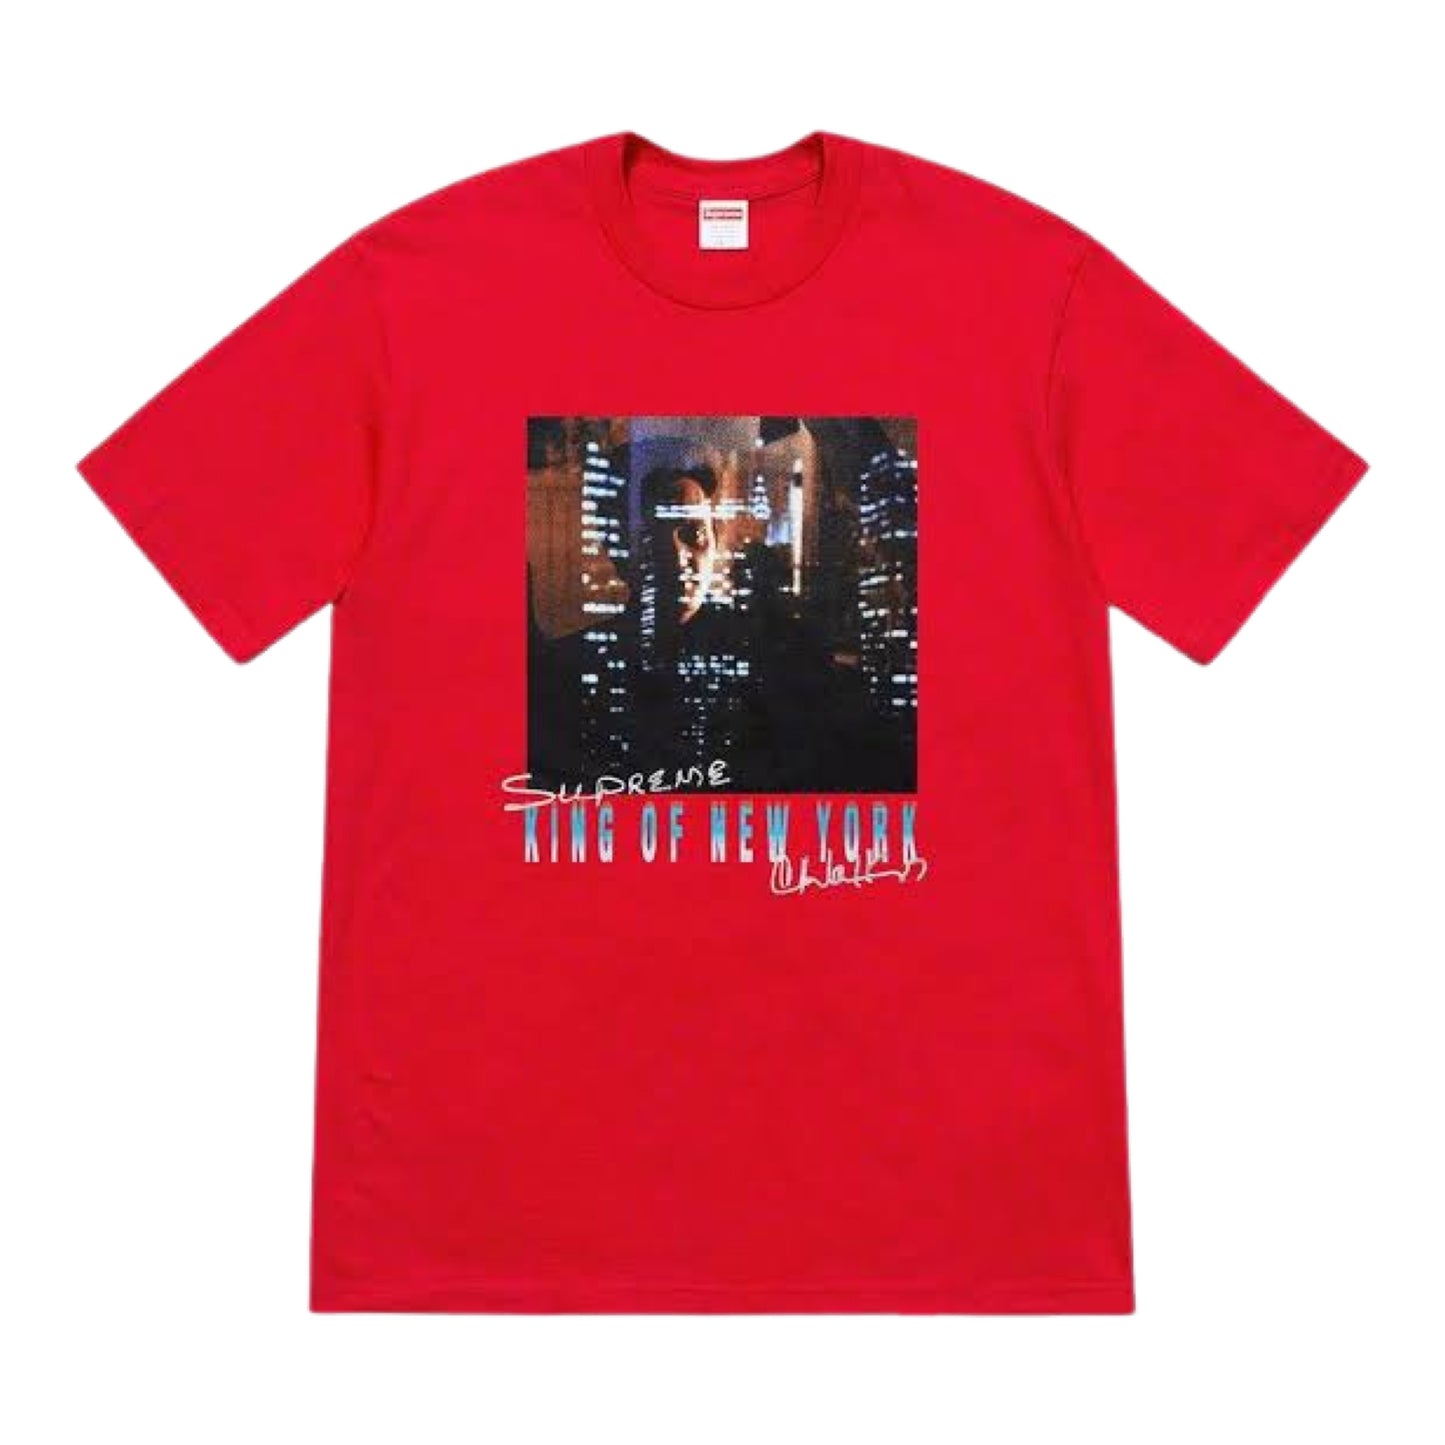 Supreme “King of New York” Tee Red SS19